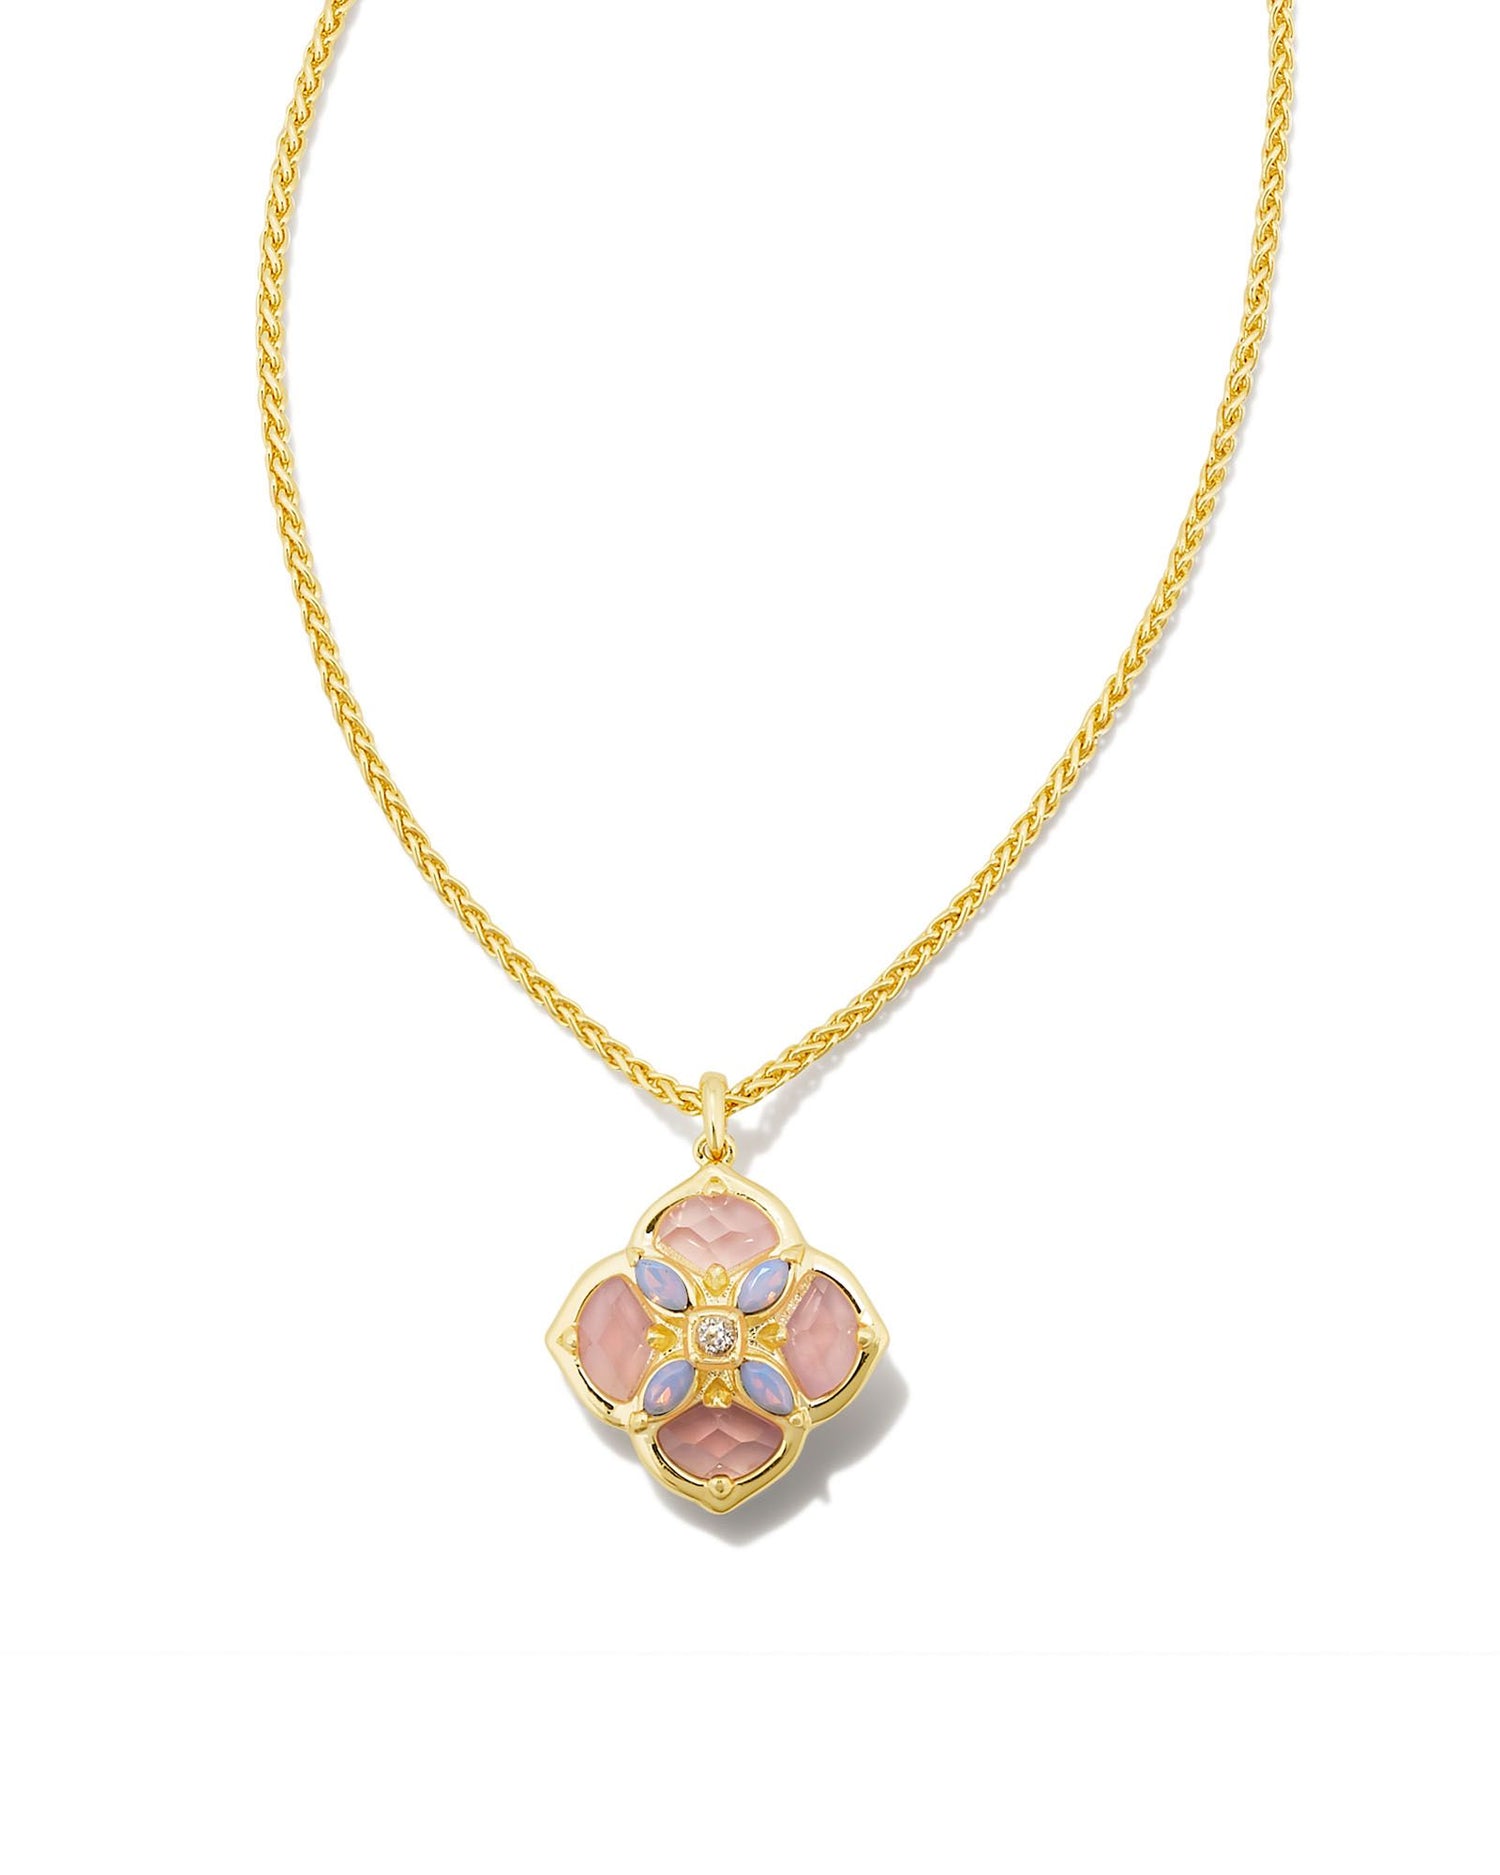 Our signature logo meets gorgeous stone detailing for the first time in the Dira Stone Gold Short Pendant Necklace. Featuring custom-cut stones and gems assembled into our logo shape, this pendant is bound to be a new favorite in your collection. The metal is 24k gold plated over brass with rose colored stones. 